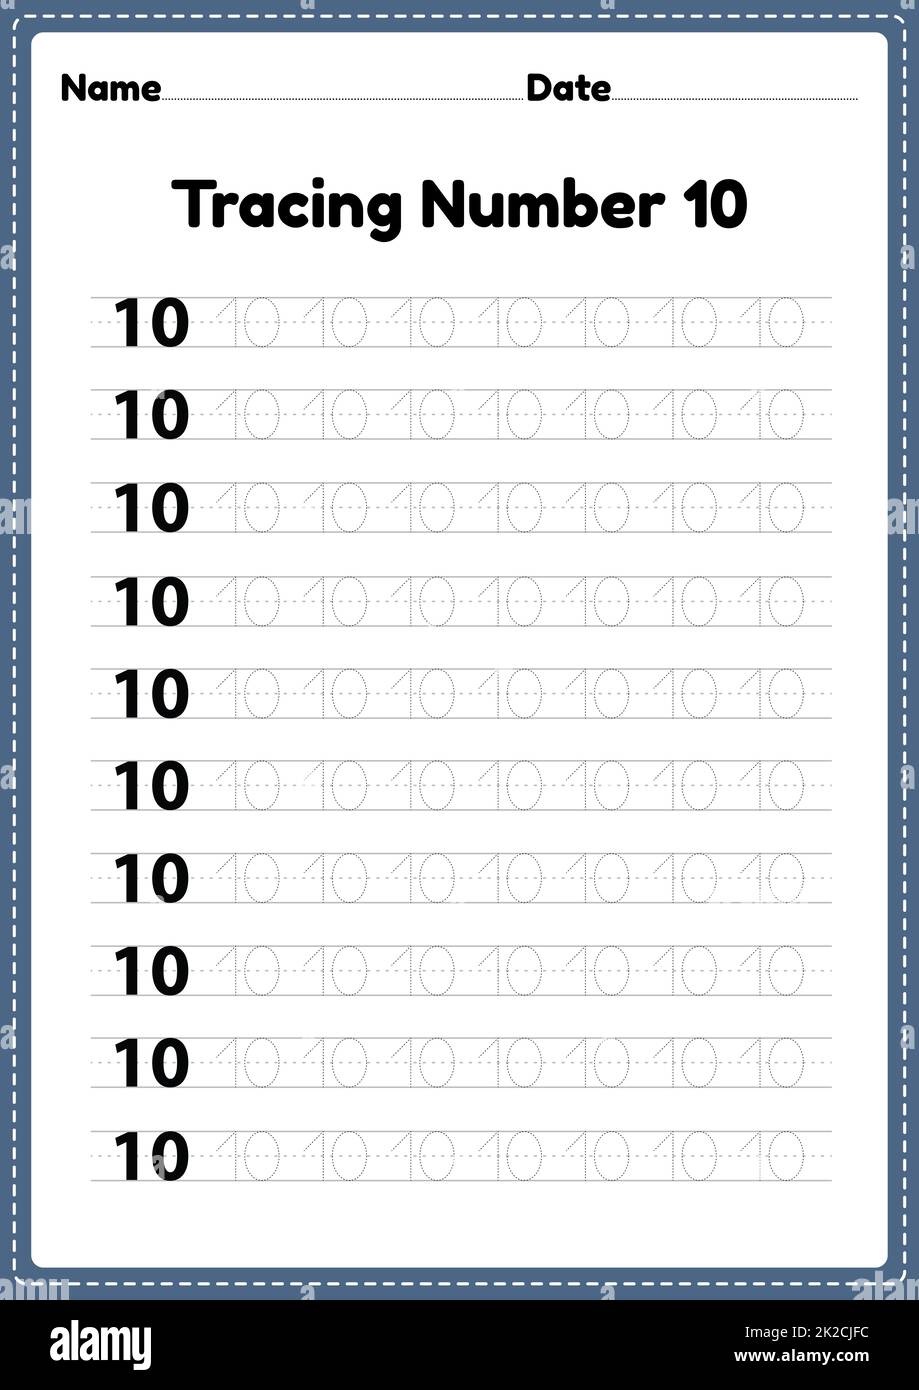 Tracing number 10 worksheet for kindergarten and preschool kids for educational handwriting practice in a printable page. Stock Photo